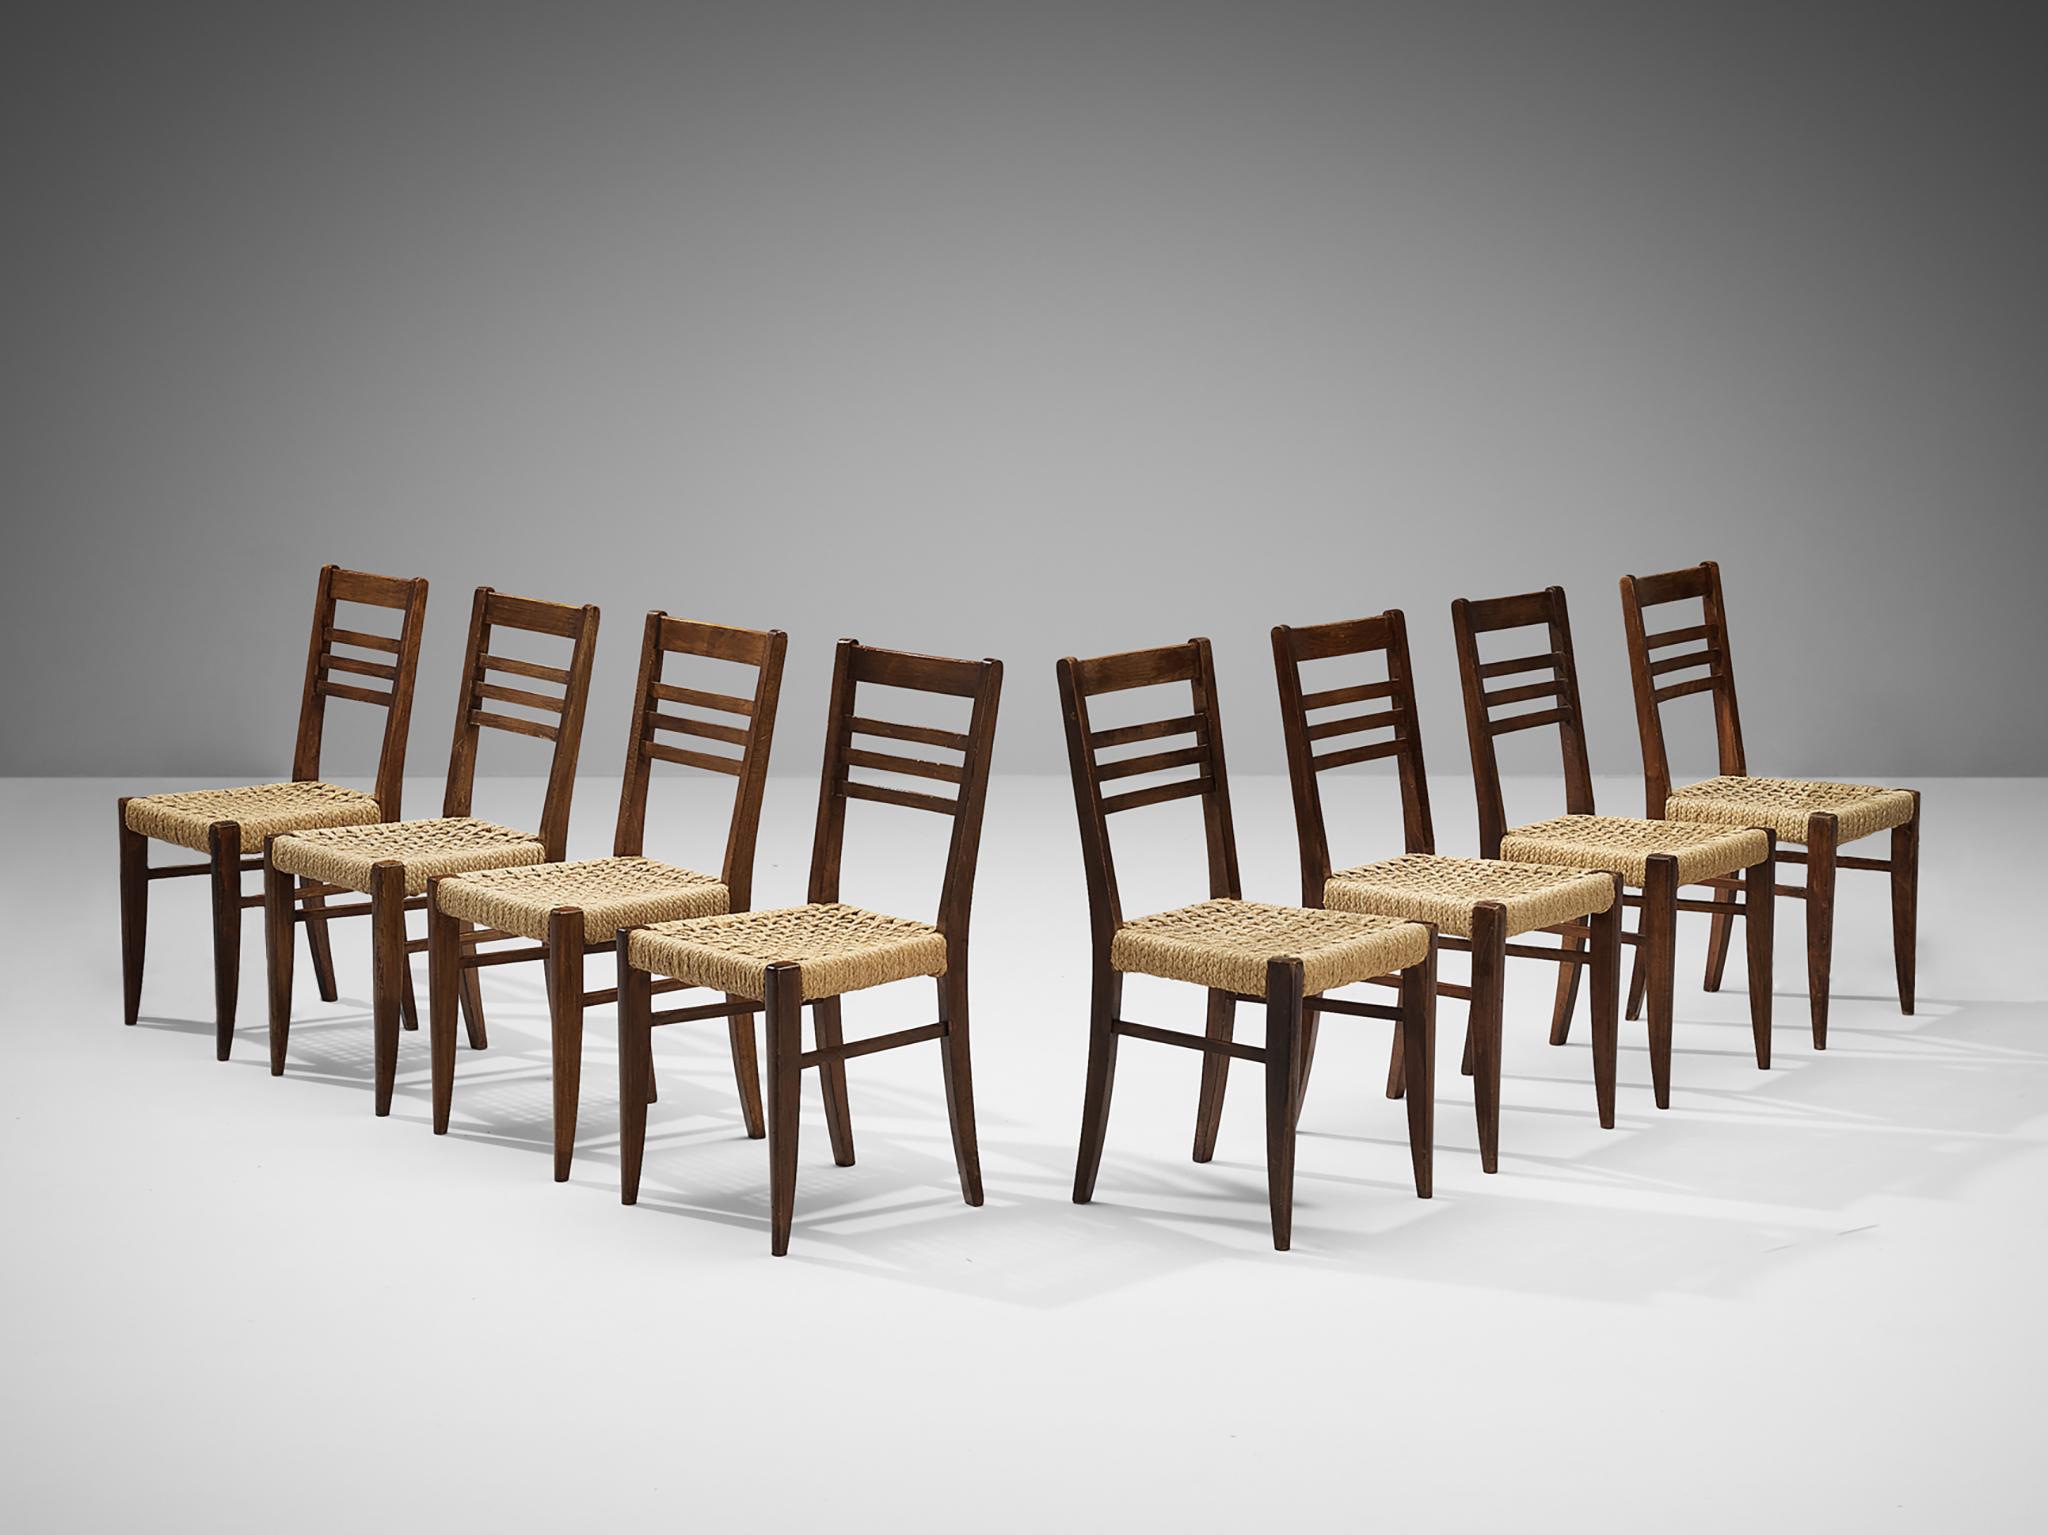 Adrien Audoux and Frida Minet for Vibo, set of eight dining chairs, beech, rope hemp, France, late 1940s 

Set of eight naturalistic dining chairs designed by Adrien Audoux and Frida Minet. The seating and backrest are made of woven hemp from the